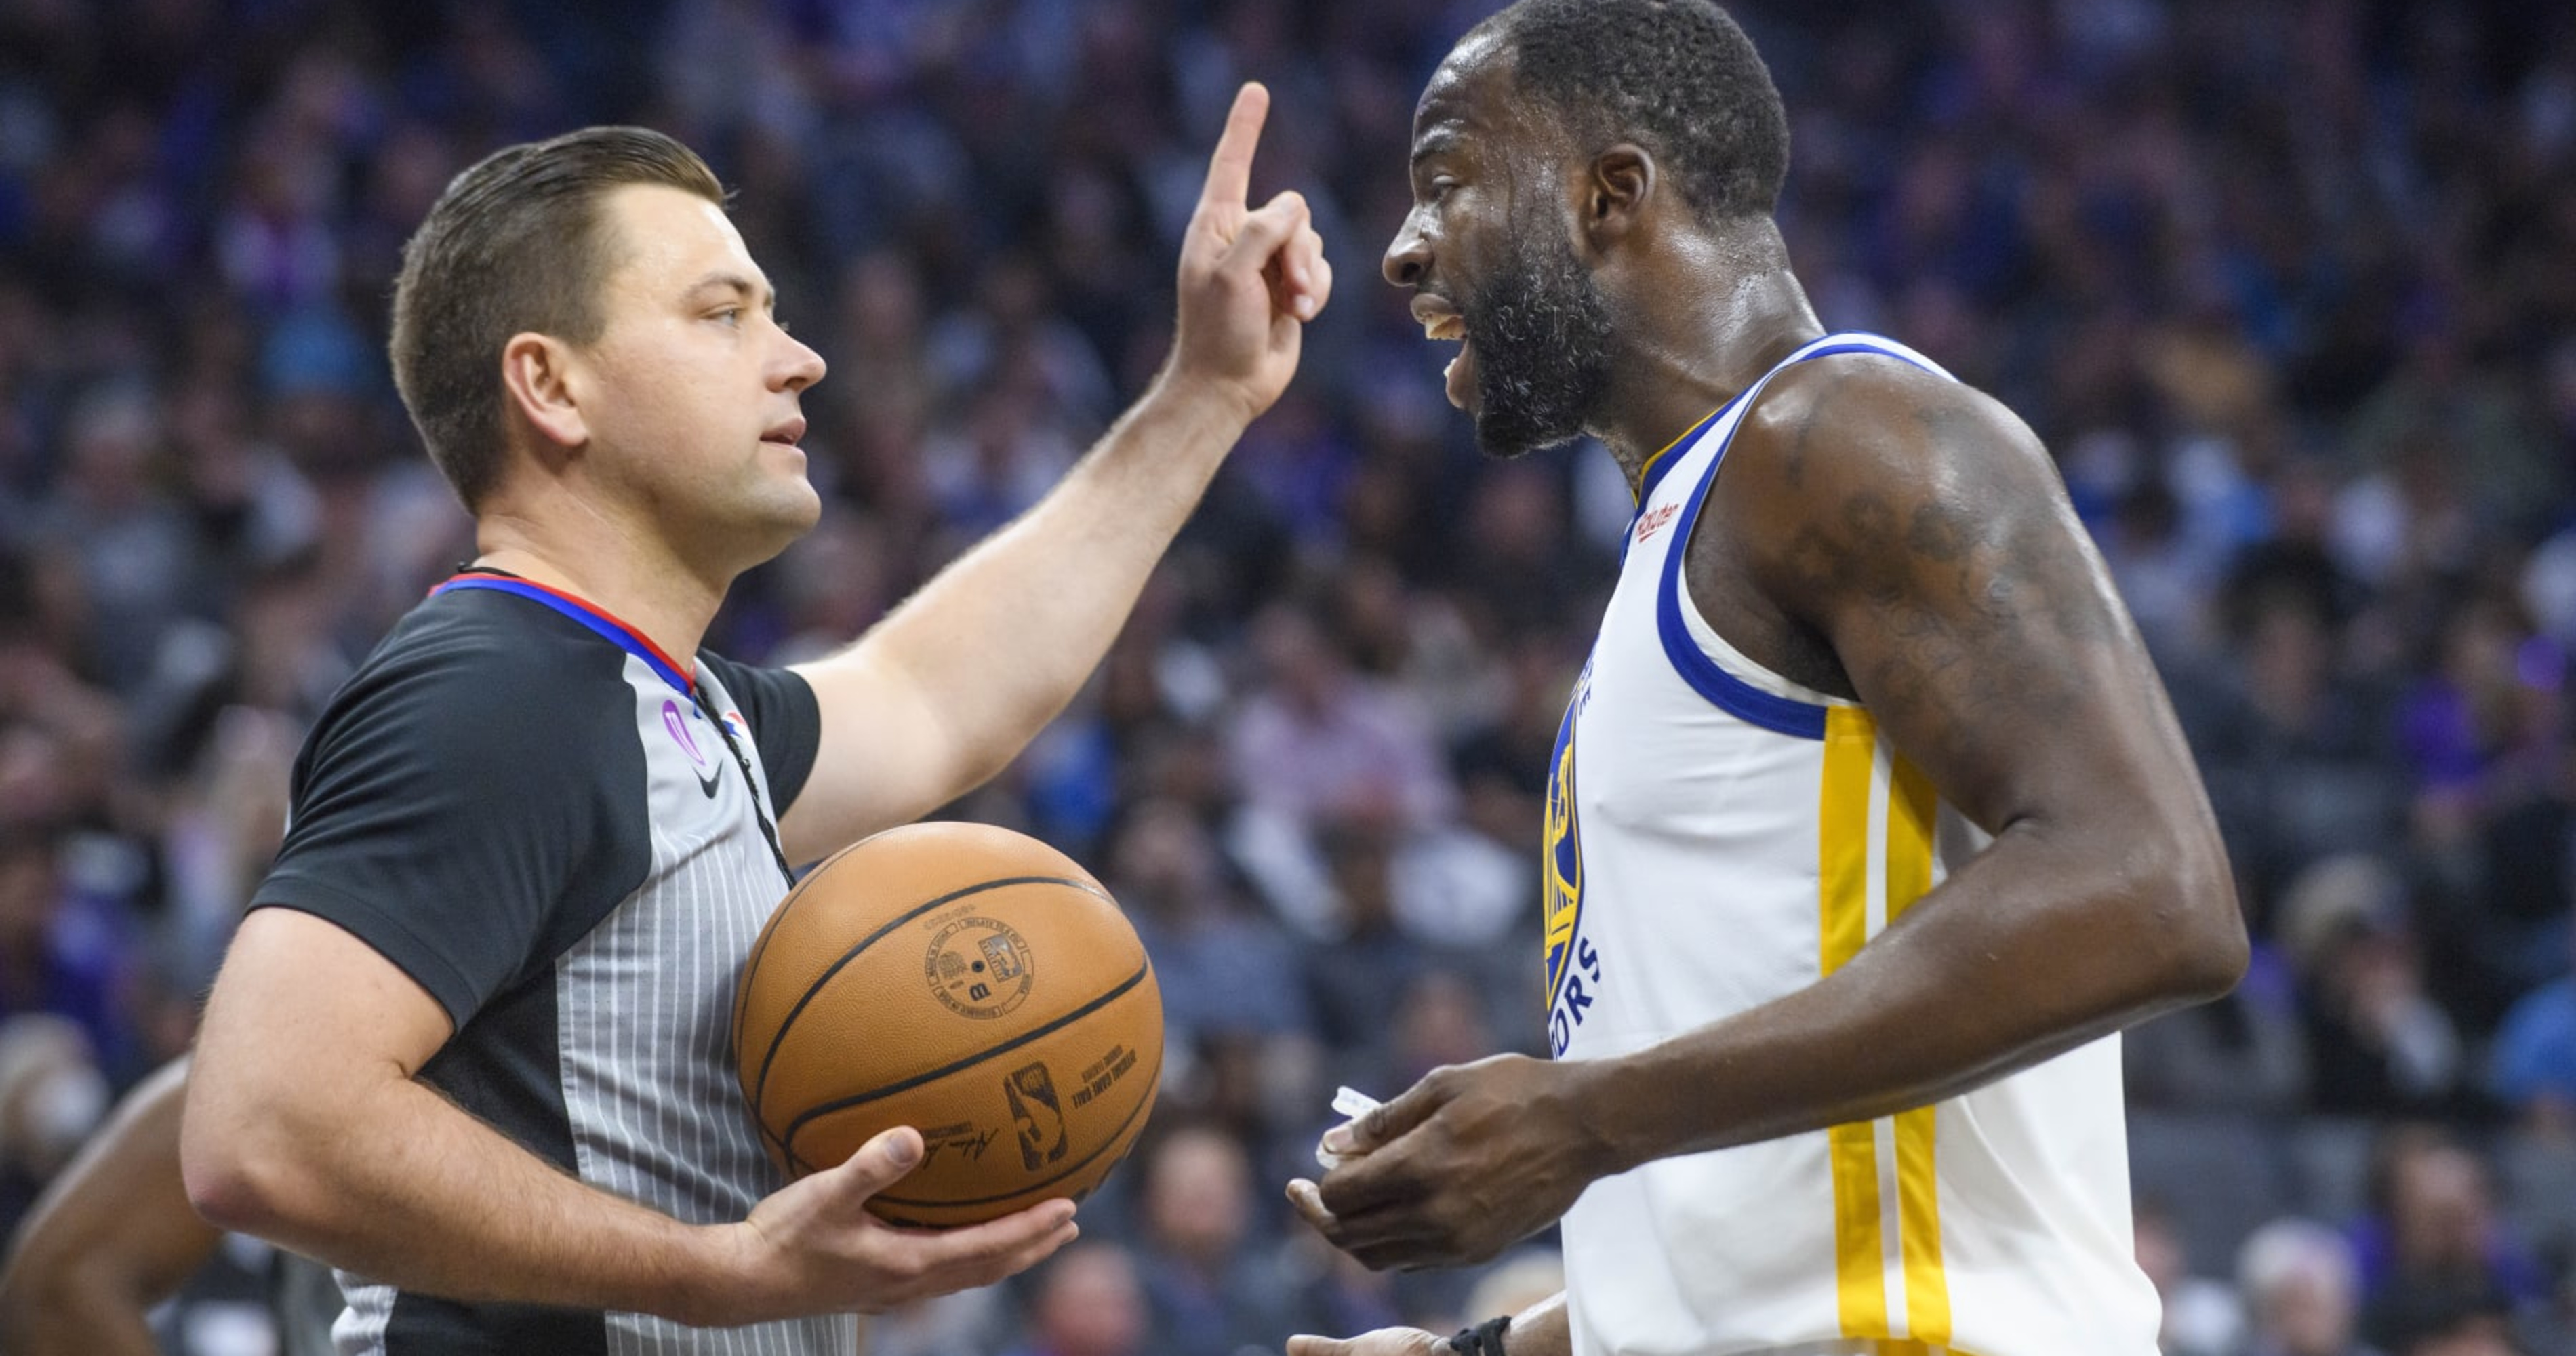 NBA Fans Torn as Draymond Green Ejected for Stepping on Sabonis in